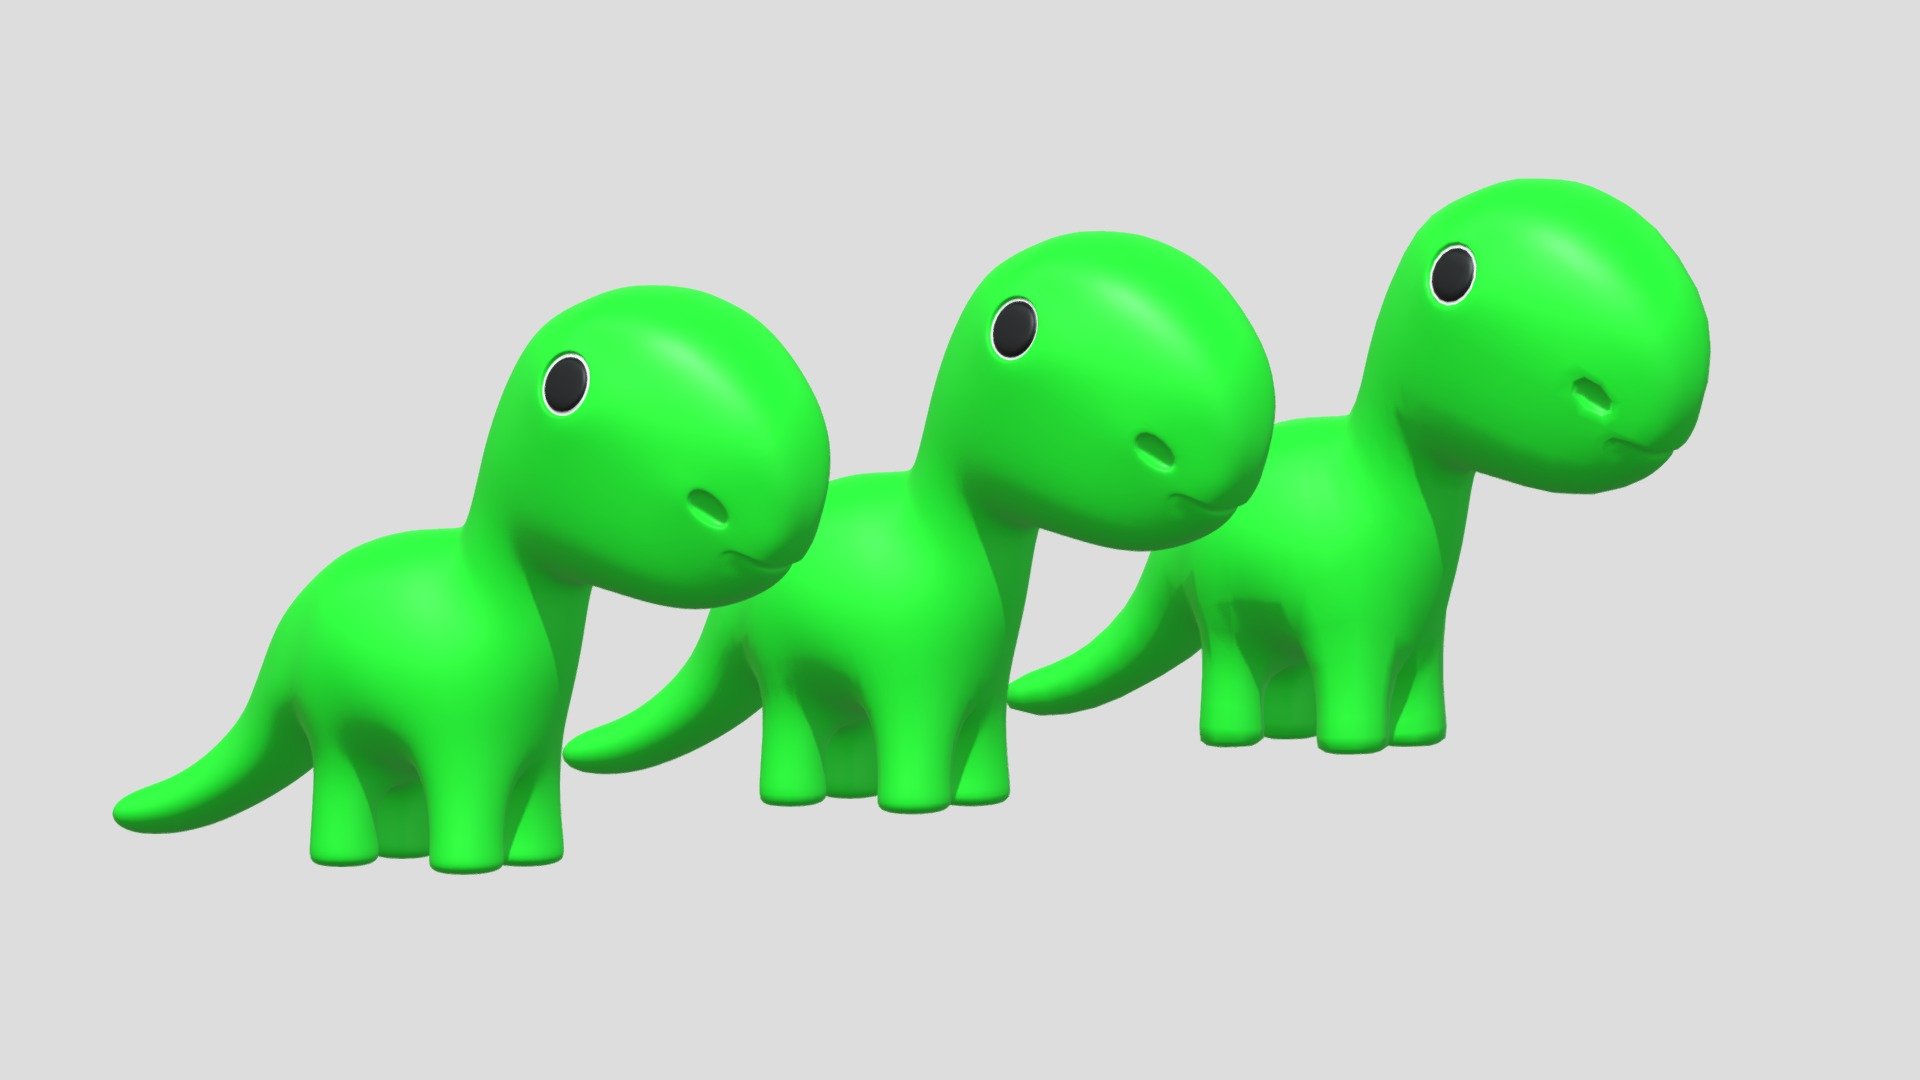 -Cartoon Cute Dinosaur Toy.

-This product contains 1 object.

-High Poly : Verts : 22,978 Faces : 22,976.

-Mid Poly : Verts : 5,746 Faces : 5,744.

-Low Poly : Verts : 1,438 Faces : 1,436.

-Materials and objects have the correct names.

-This product was created in Blender 2.8

-Formats: blend, fbx, obj, c4d, dae, abc, stl, glb, unity.

-We hope you enjoy this model.

-Thank you 3d model